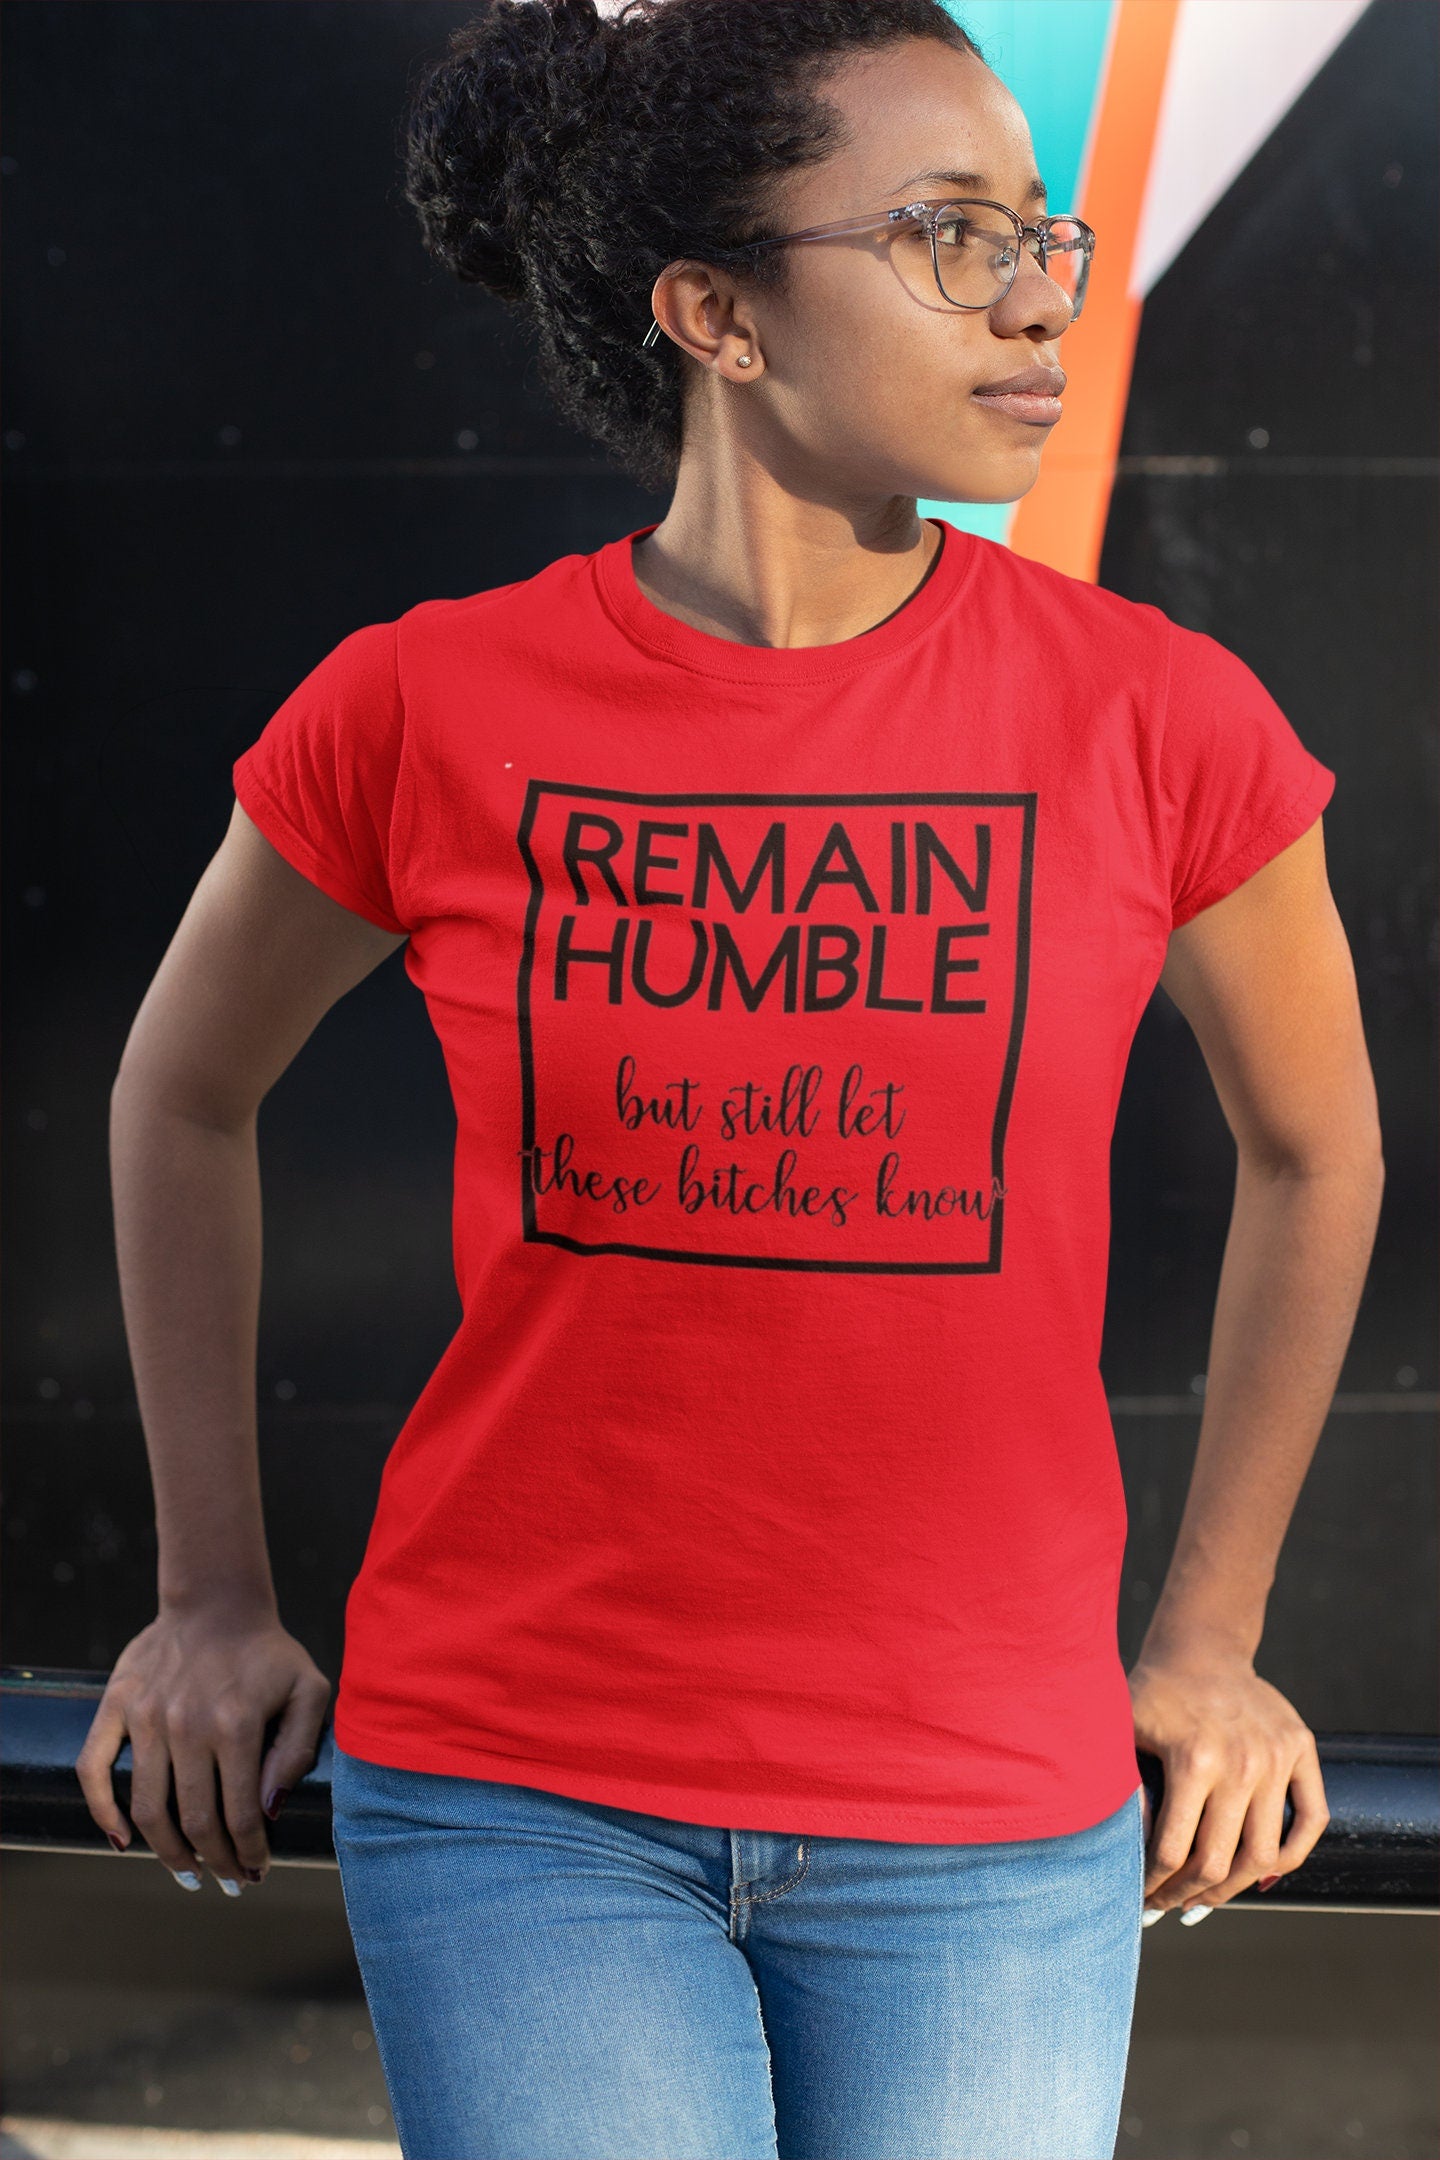 Remain Humble T-Shirt, Let them Know T-Shirt, Graphic Tee B1ack By Design LLC 